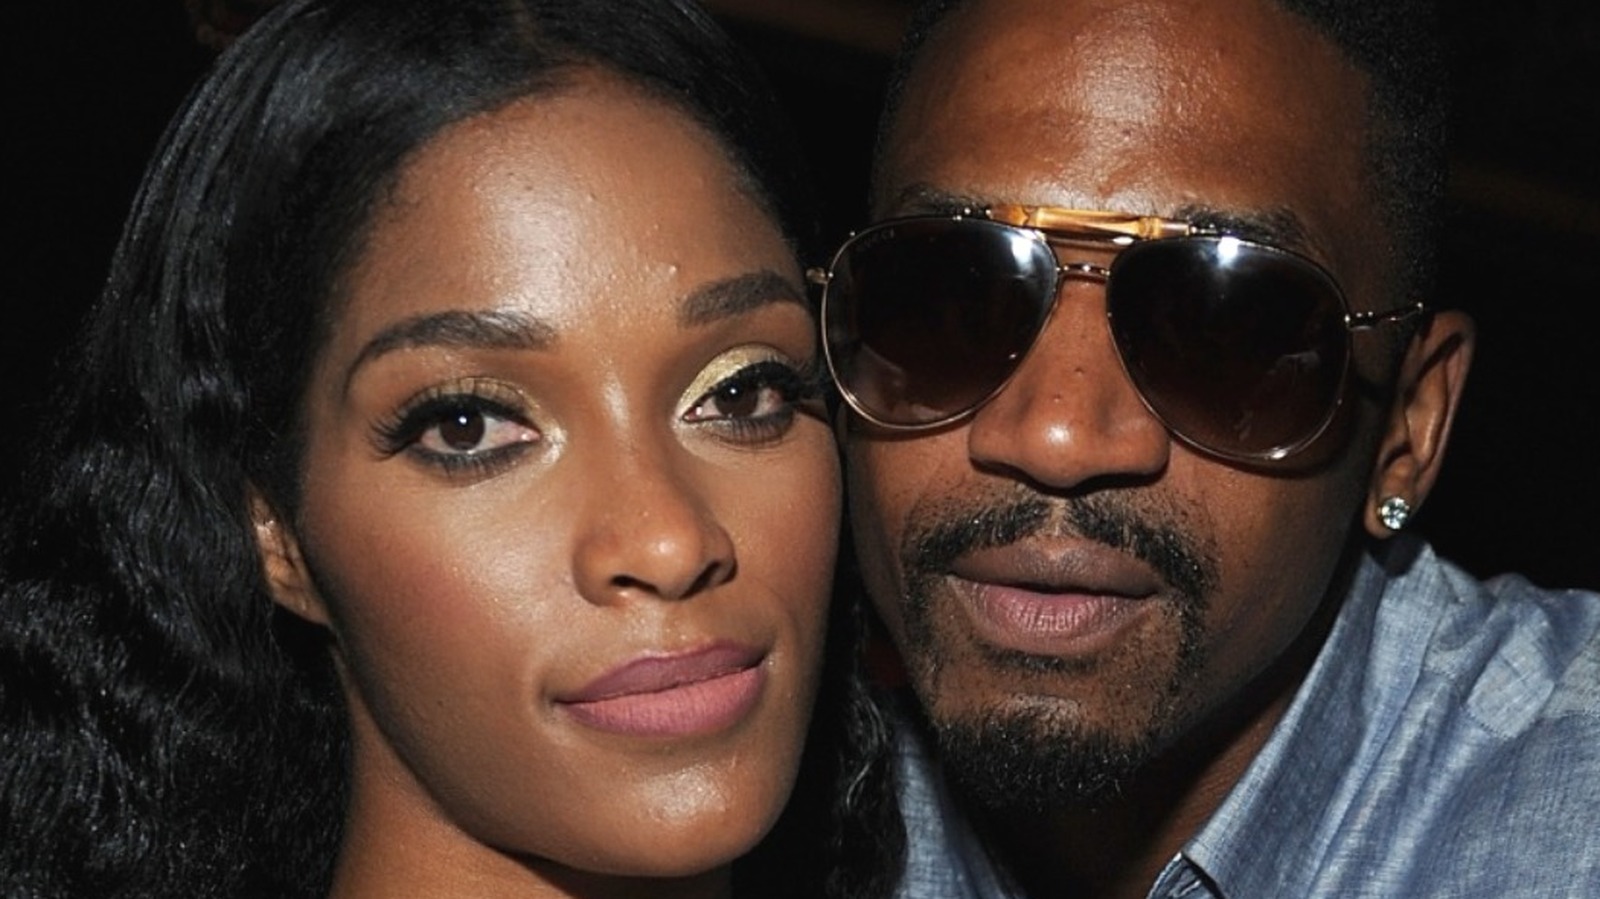 The Real Reason Joseline Hernandez And Stevie J Faked Their Marriage.